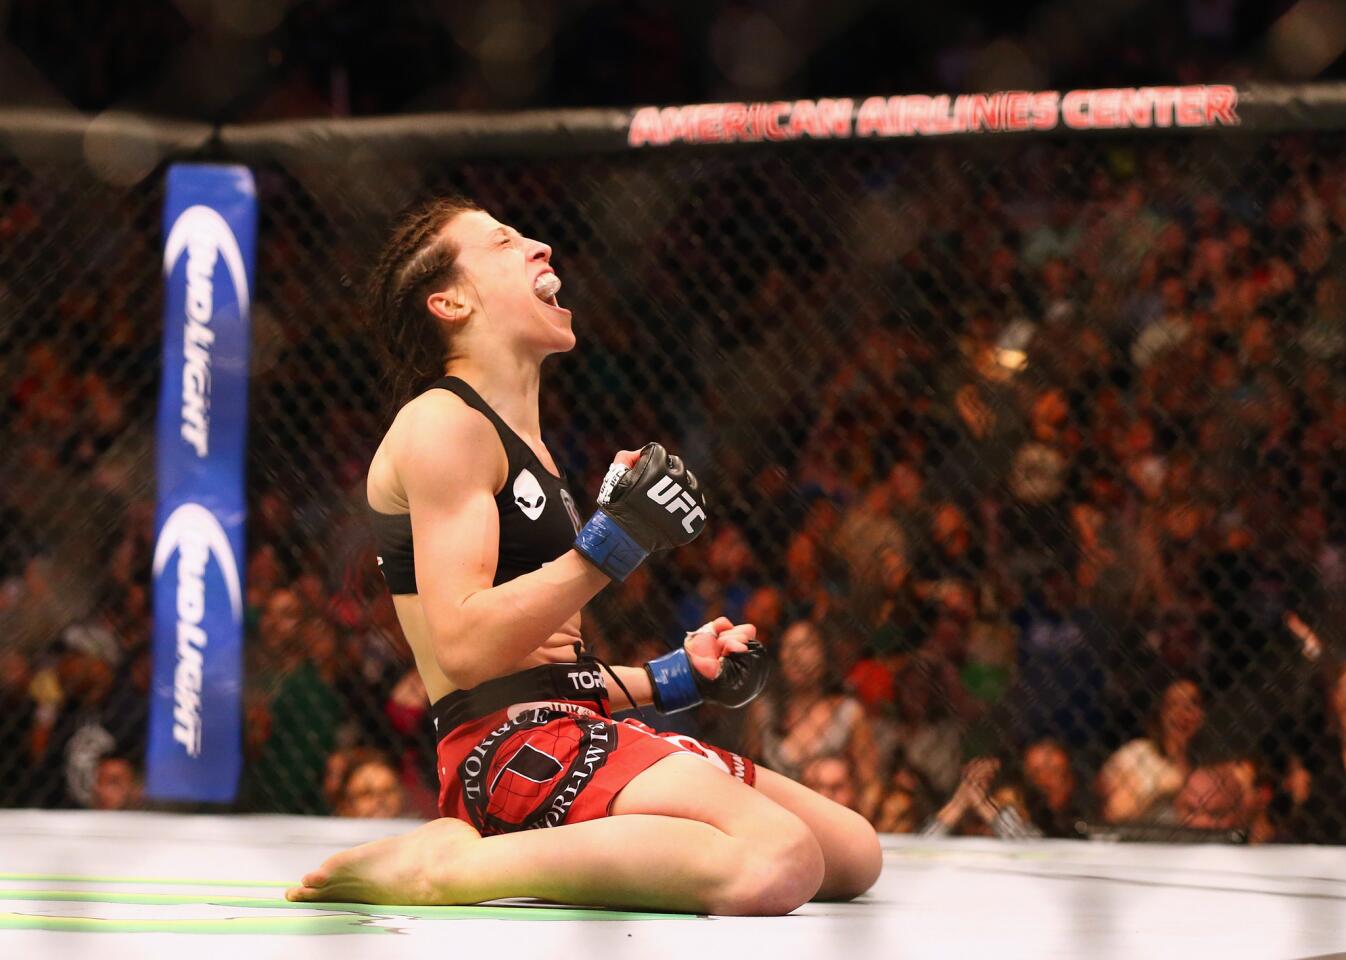 UFC champion Joanna Jedrzejczyk plans to pack a stronger punch than ever in her rematch with Claudia Gadelha.